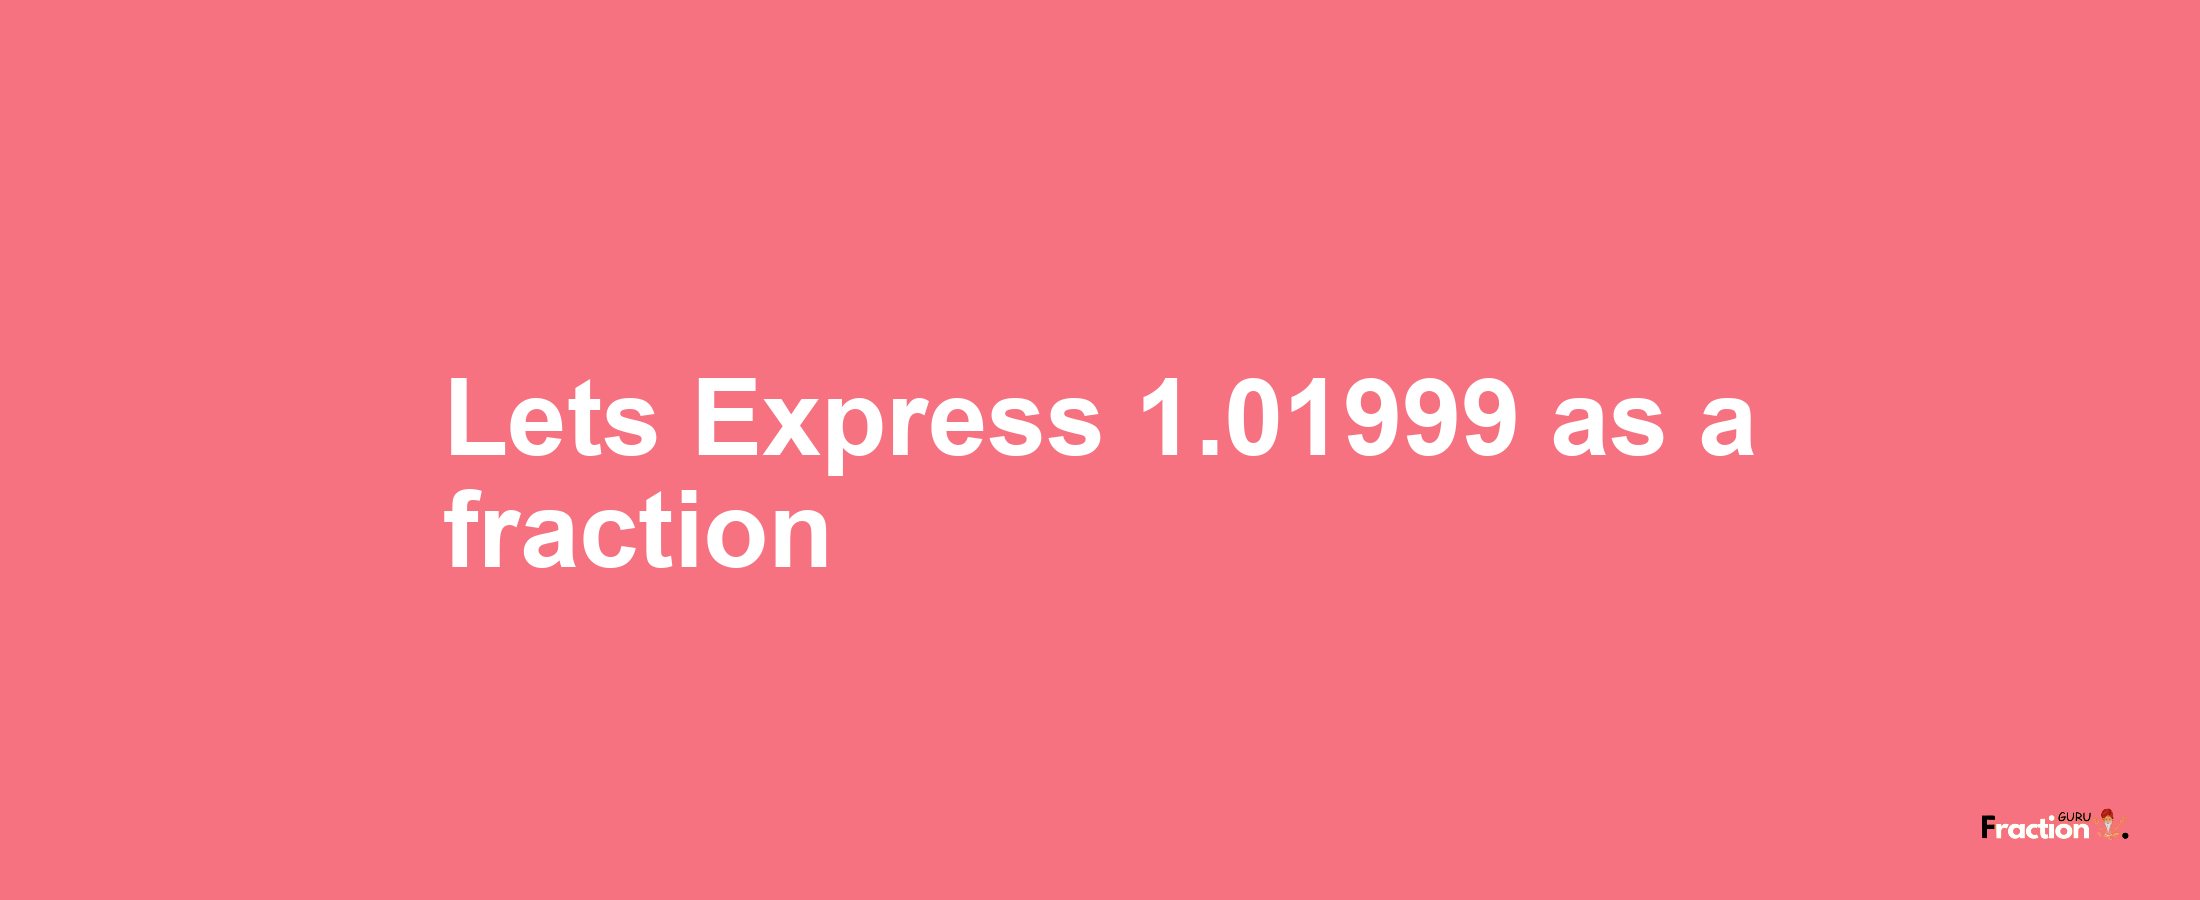 Lets Express 1.01999 as afraction